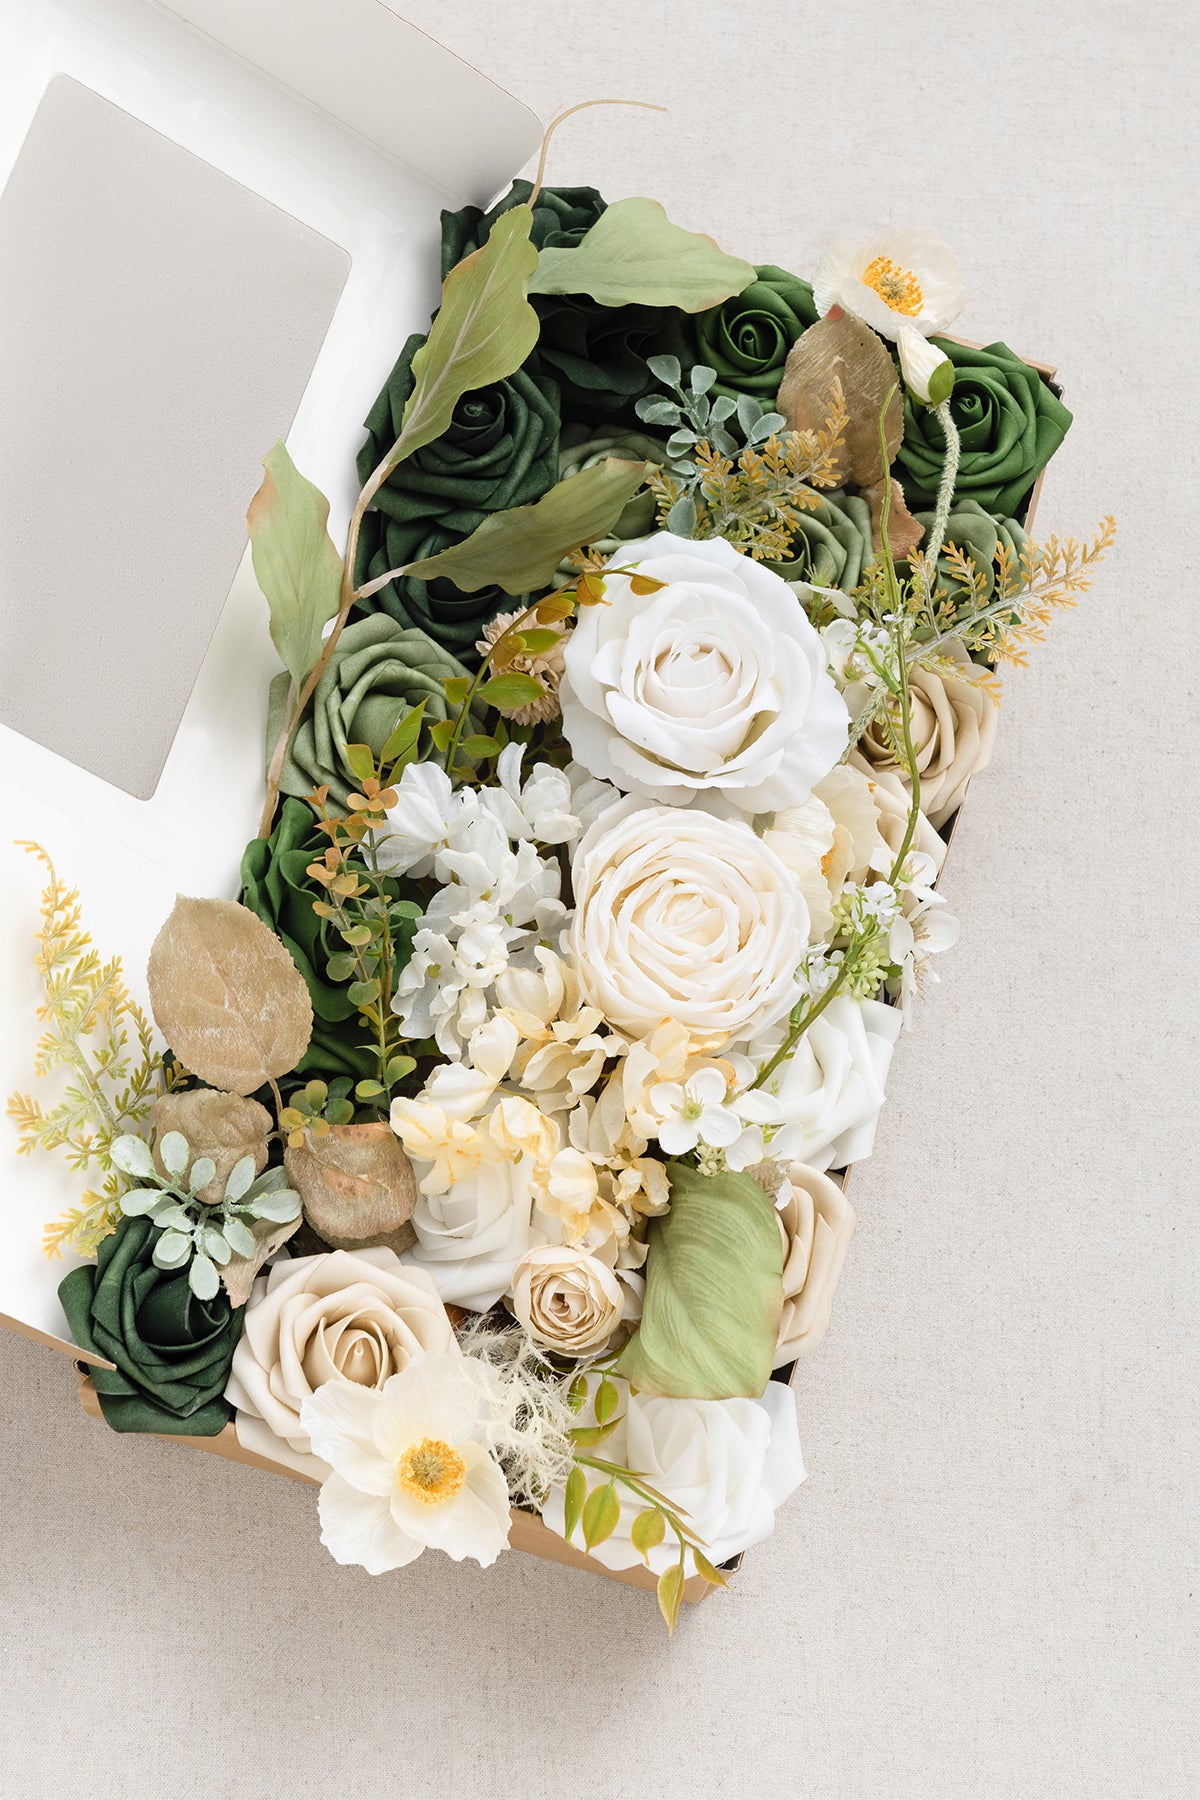  Ling's Moment White & Beige Wrist Corsages for Wedding